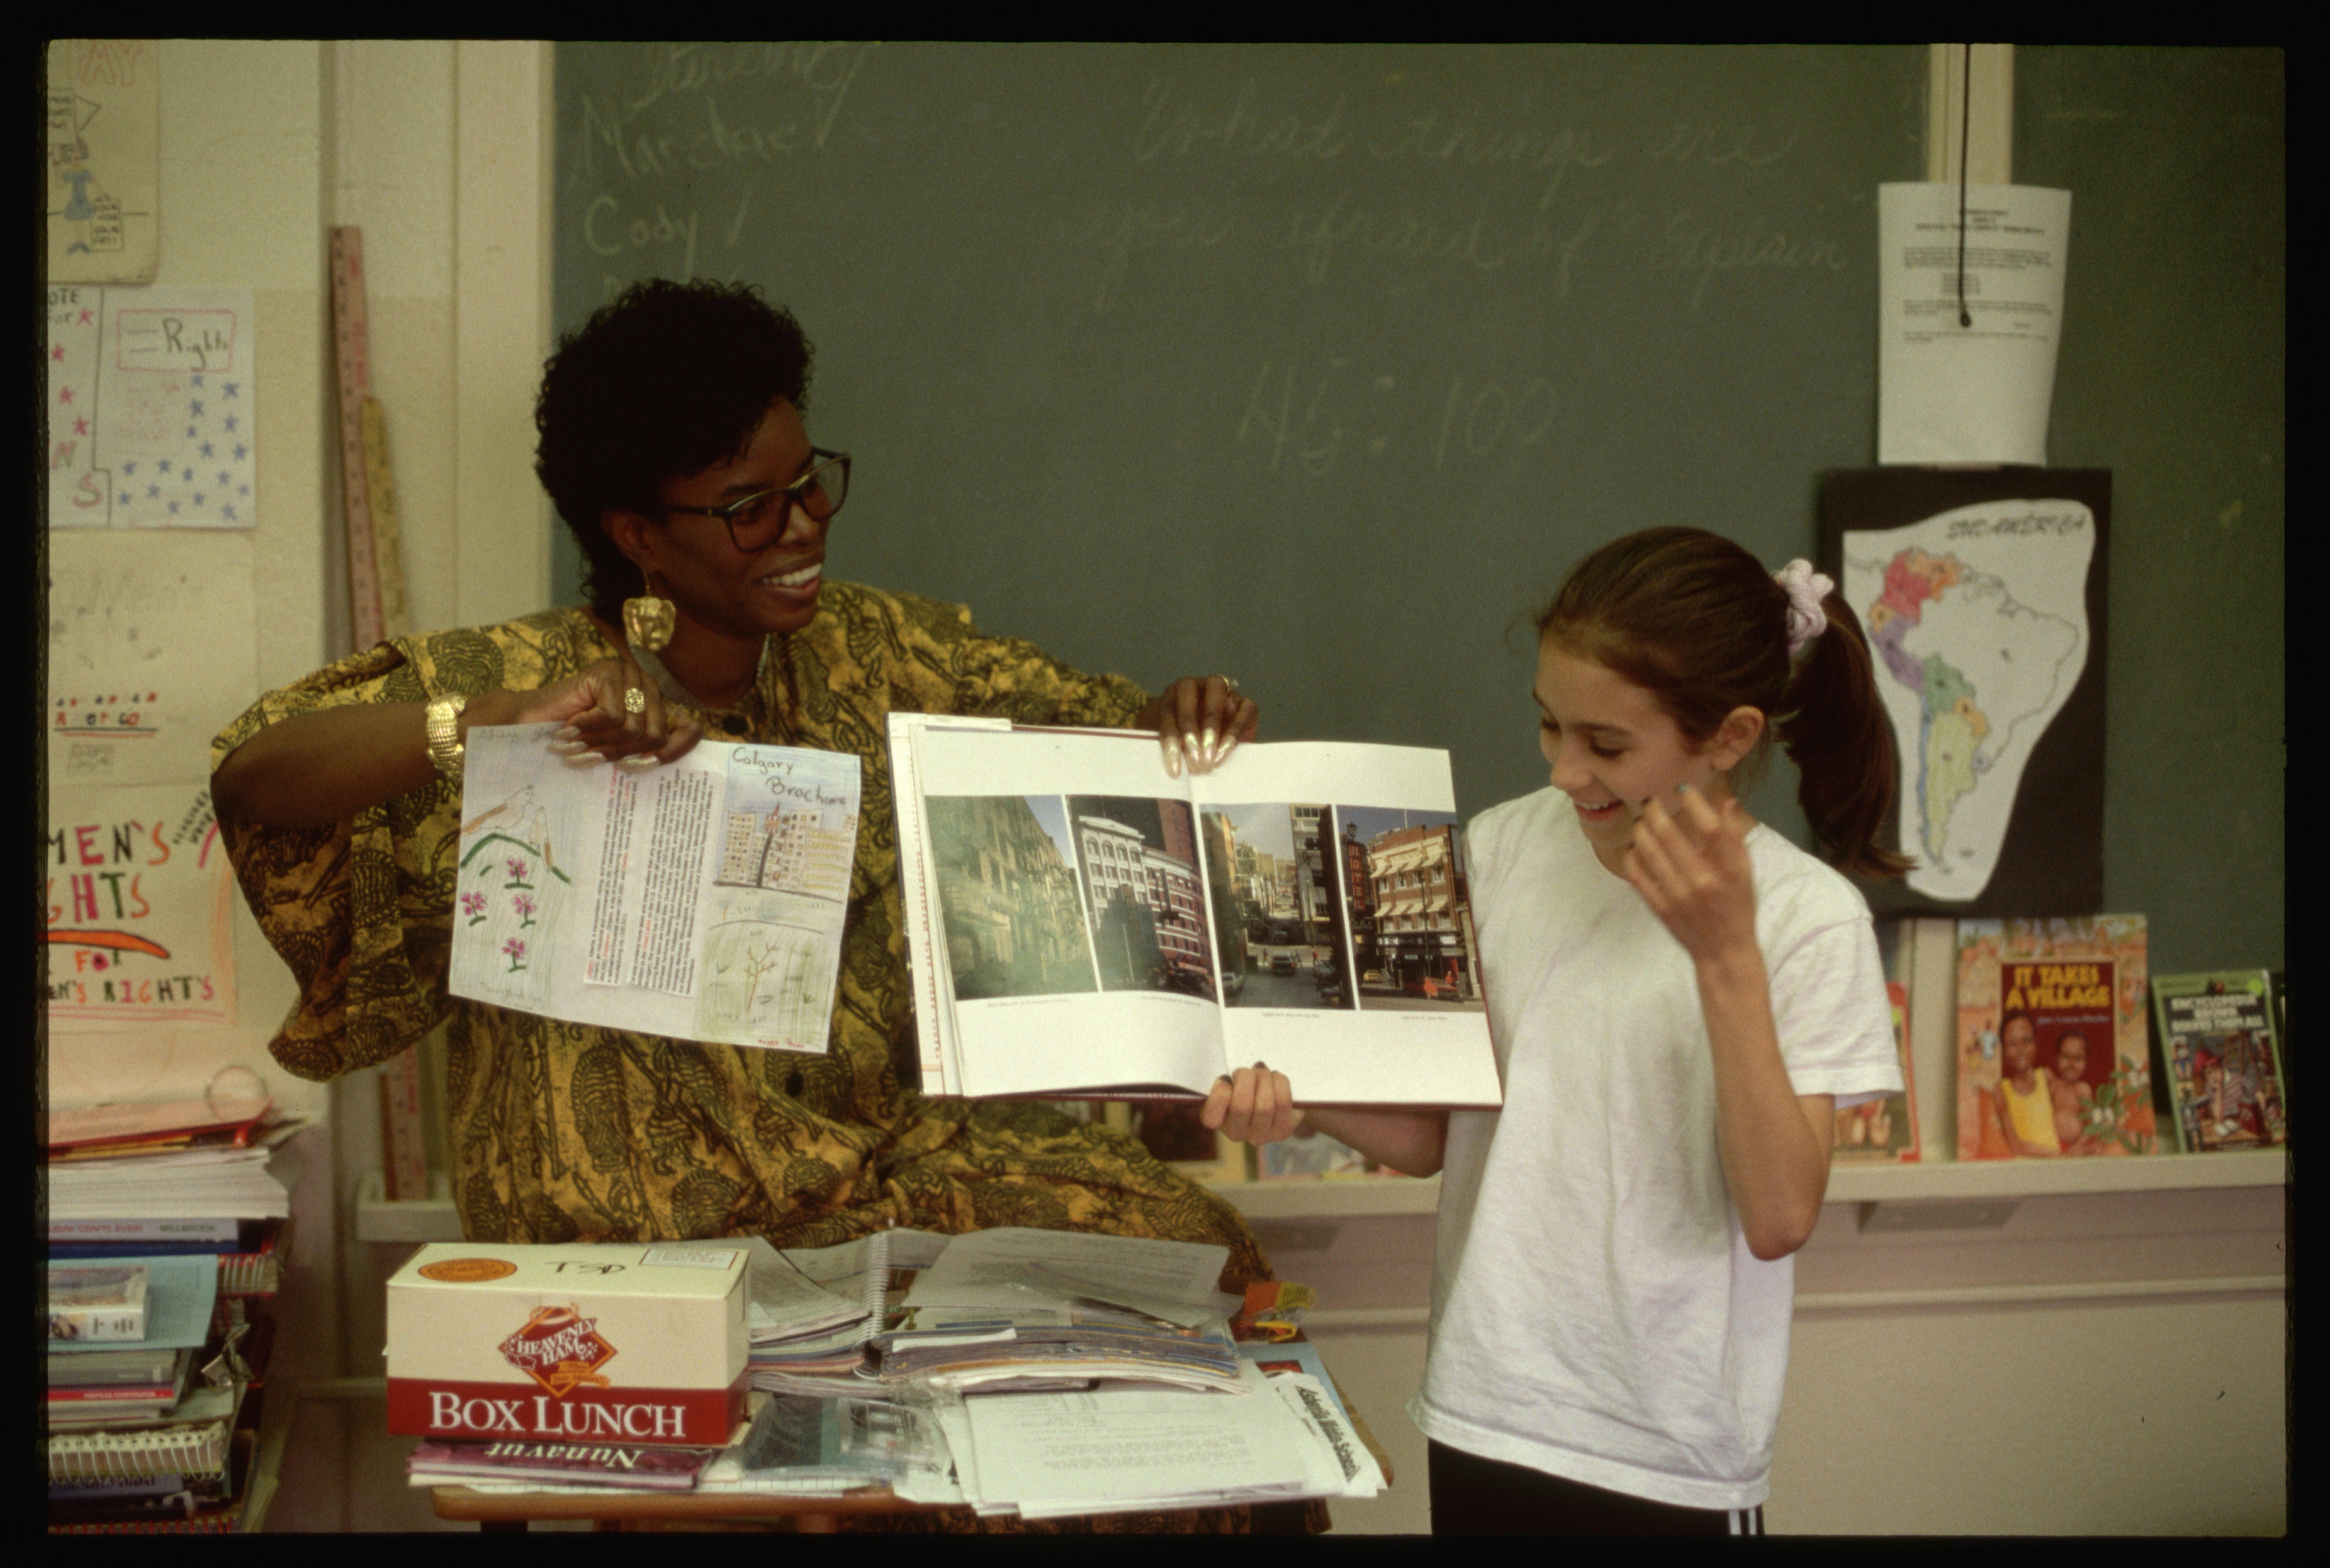 Teacher showing a book to a student in a classroom